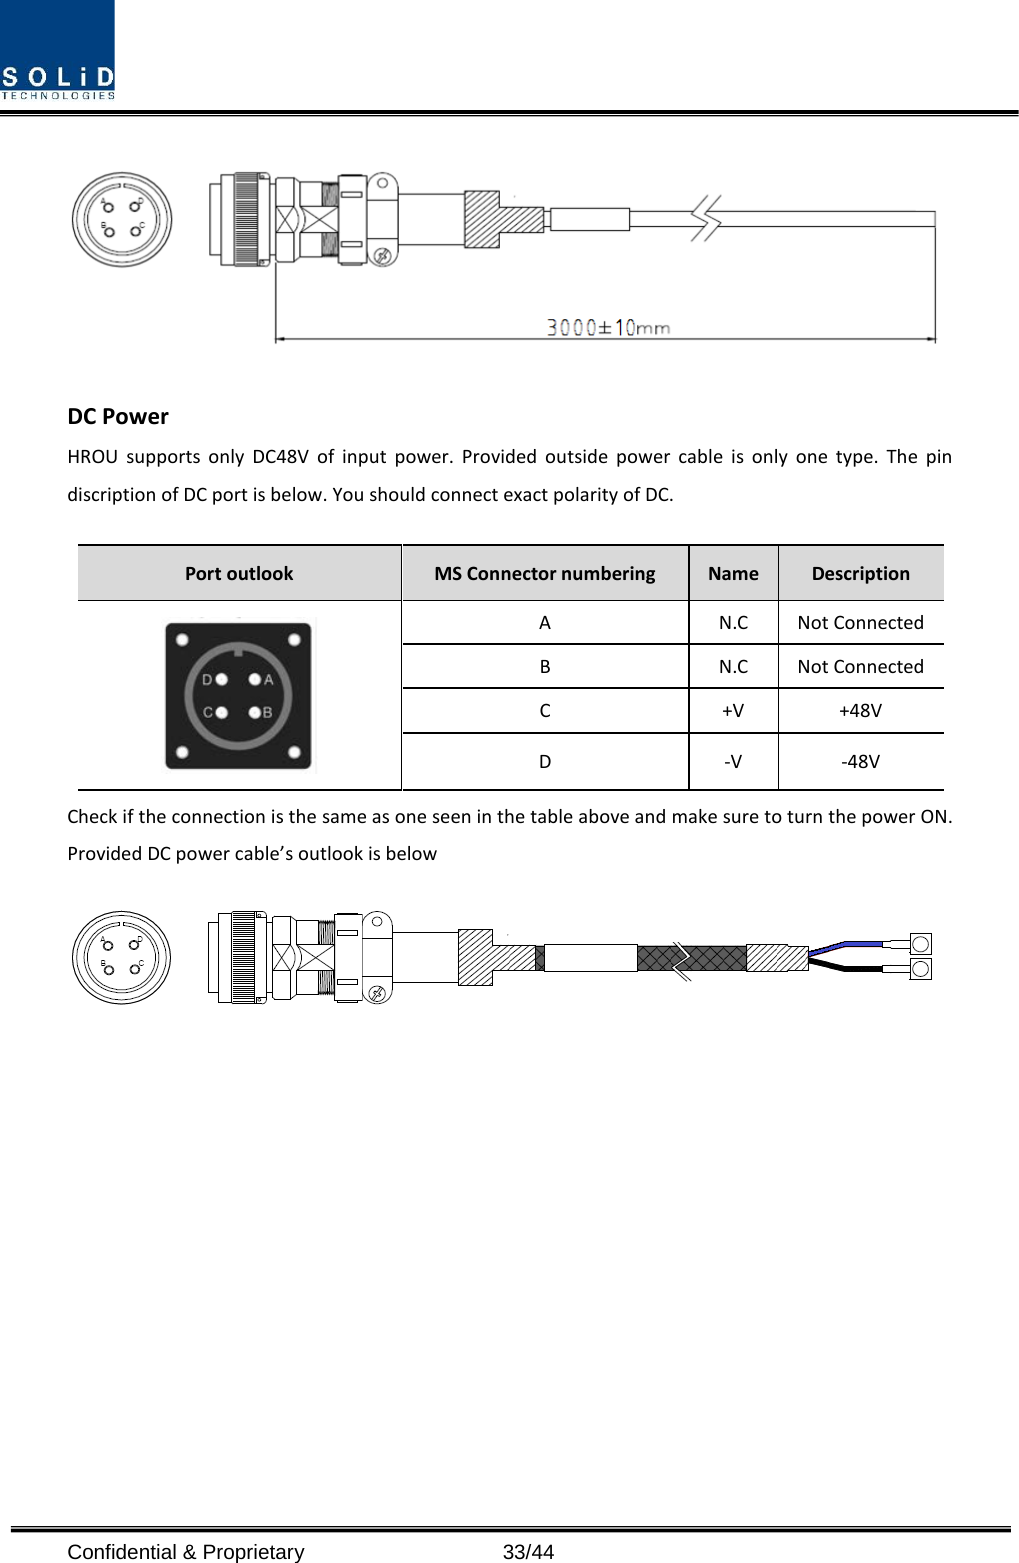  Confidential &amp; Proprietary                   33/44  DC Power HROU supports only DC48V of input power. Provided outside power cable is only one type. The pin discription of DC port is below. You should connect exact polarity of DC.  Port outlook MS Connector numbering  Name  Description  A  N.C Not Connected B  N.C Not Connected C  +V +48V D  -V  -48V Check if the connection is the same as one seen in the table above and make sure to turn the power ON. Provided DC power cable’s outlook is below    